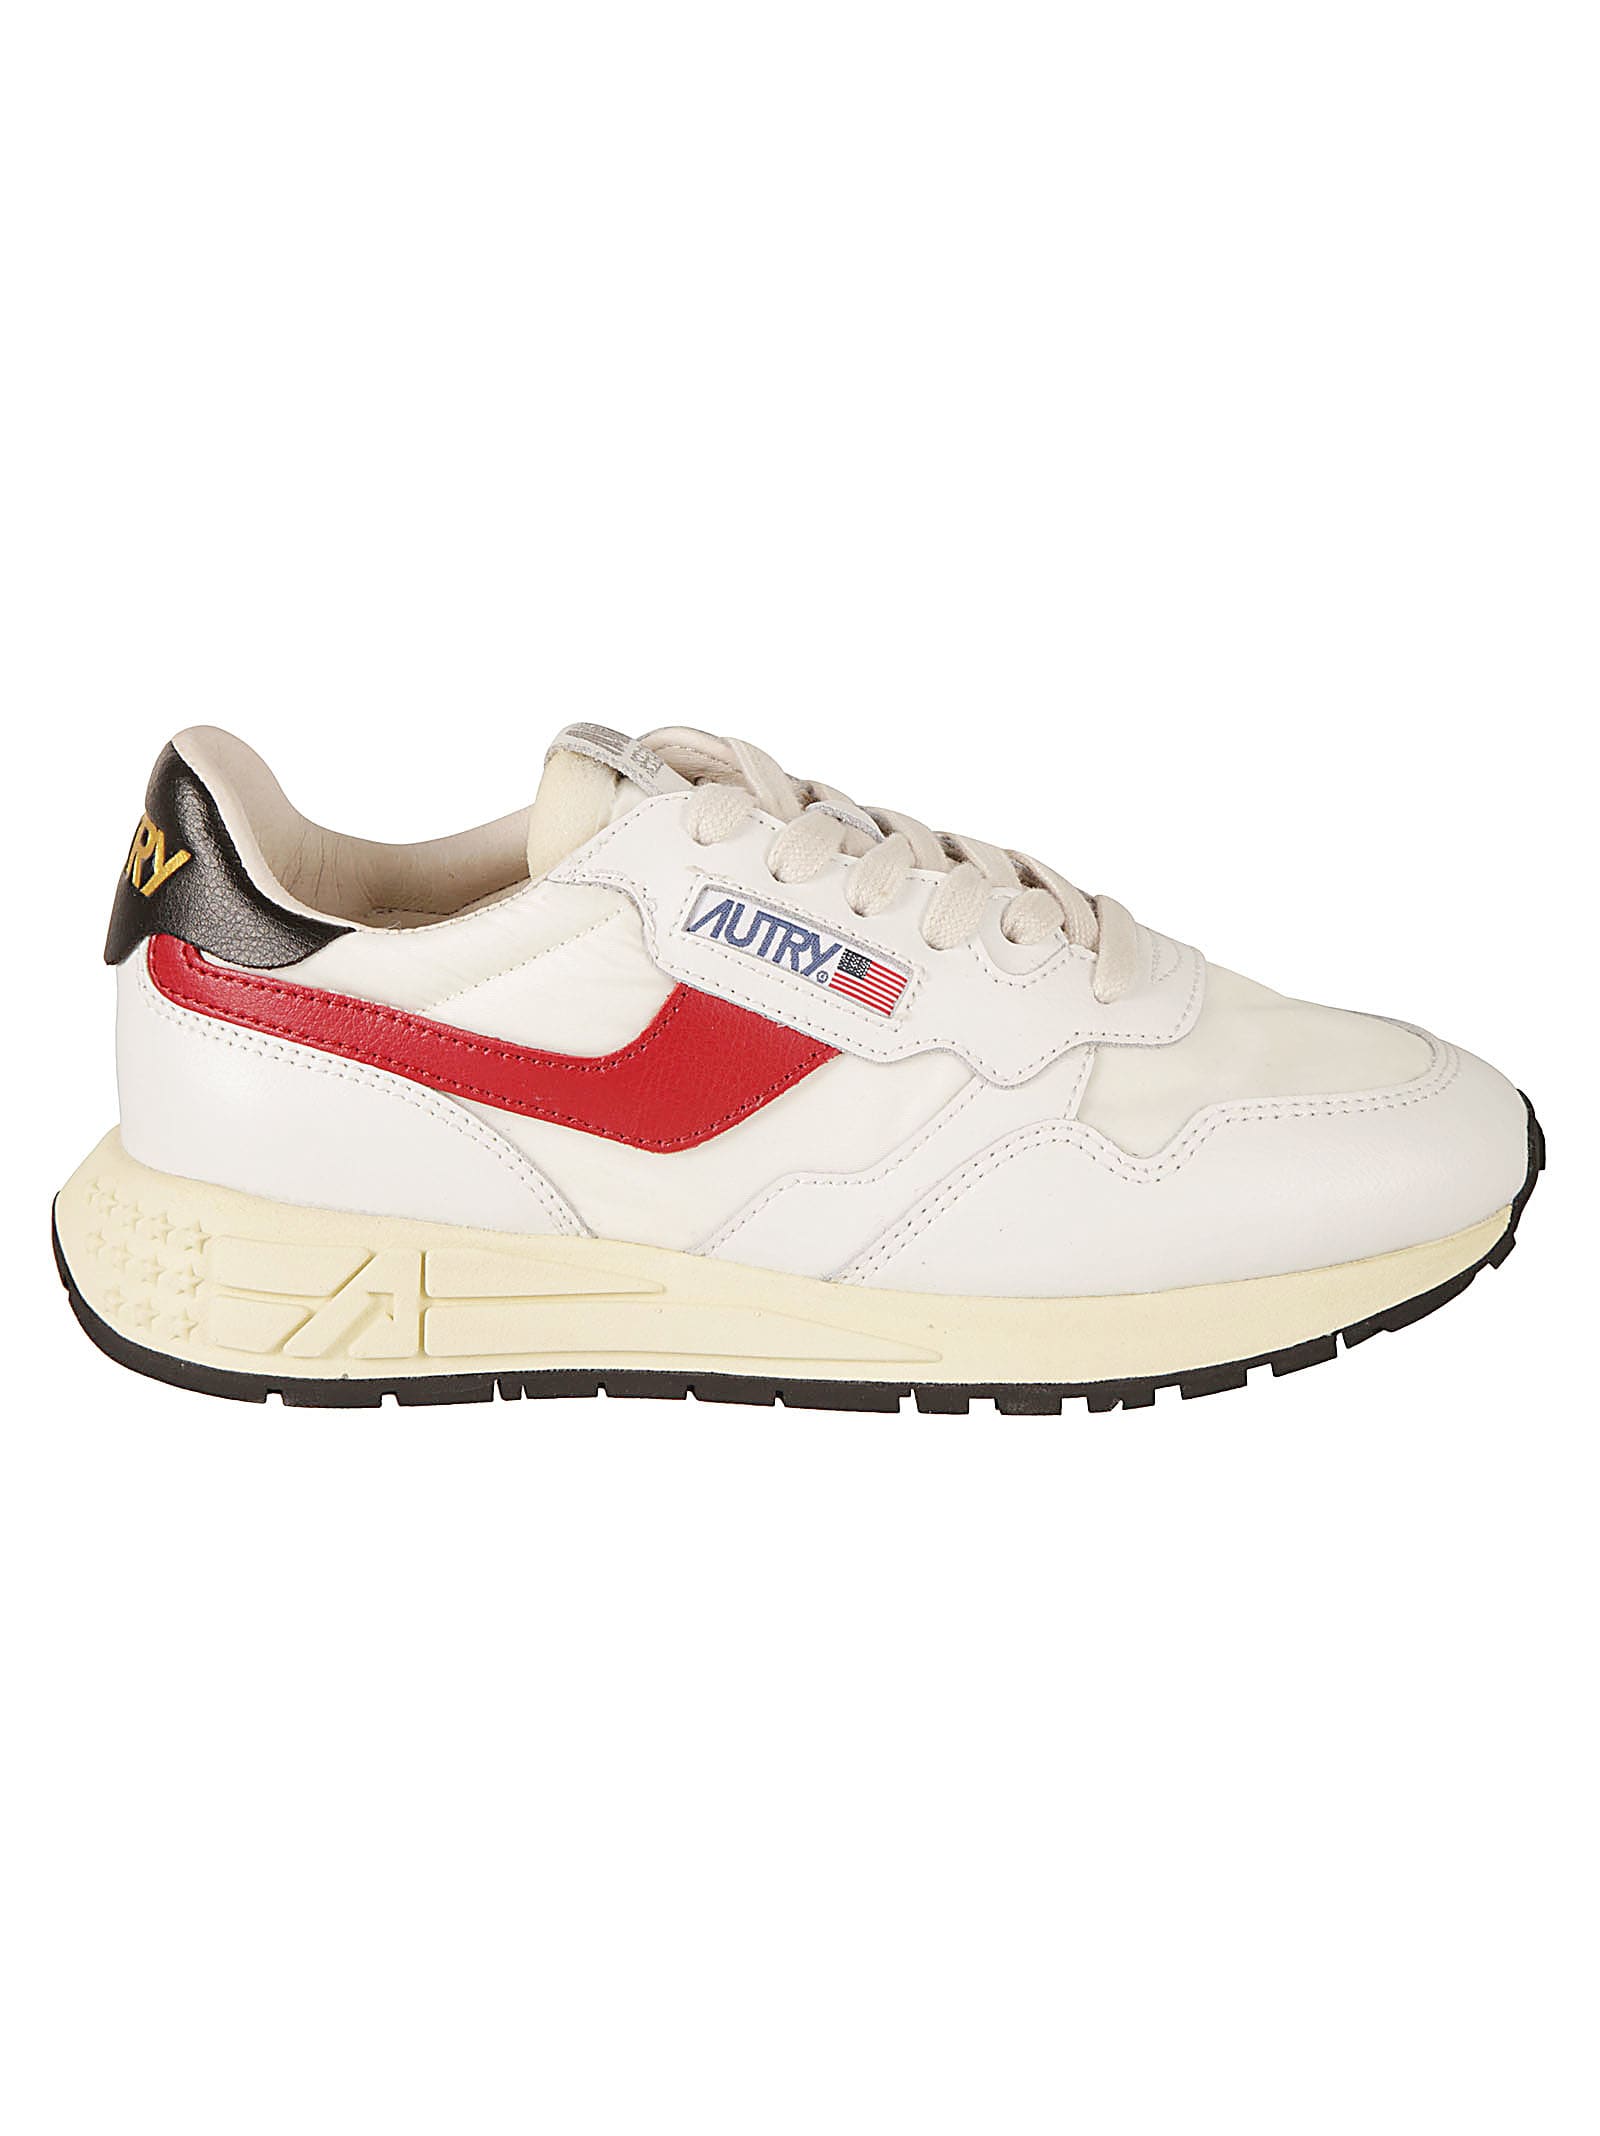 Autry Logo Patched Sneakers In White/red